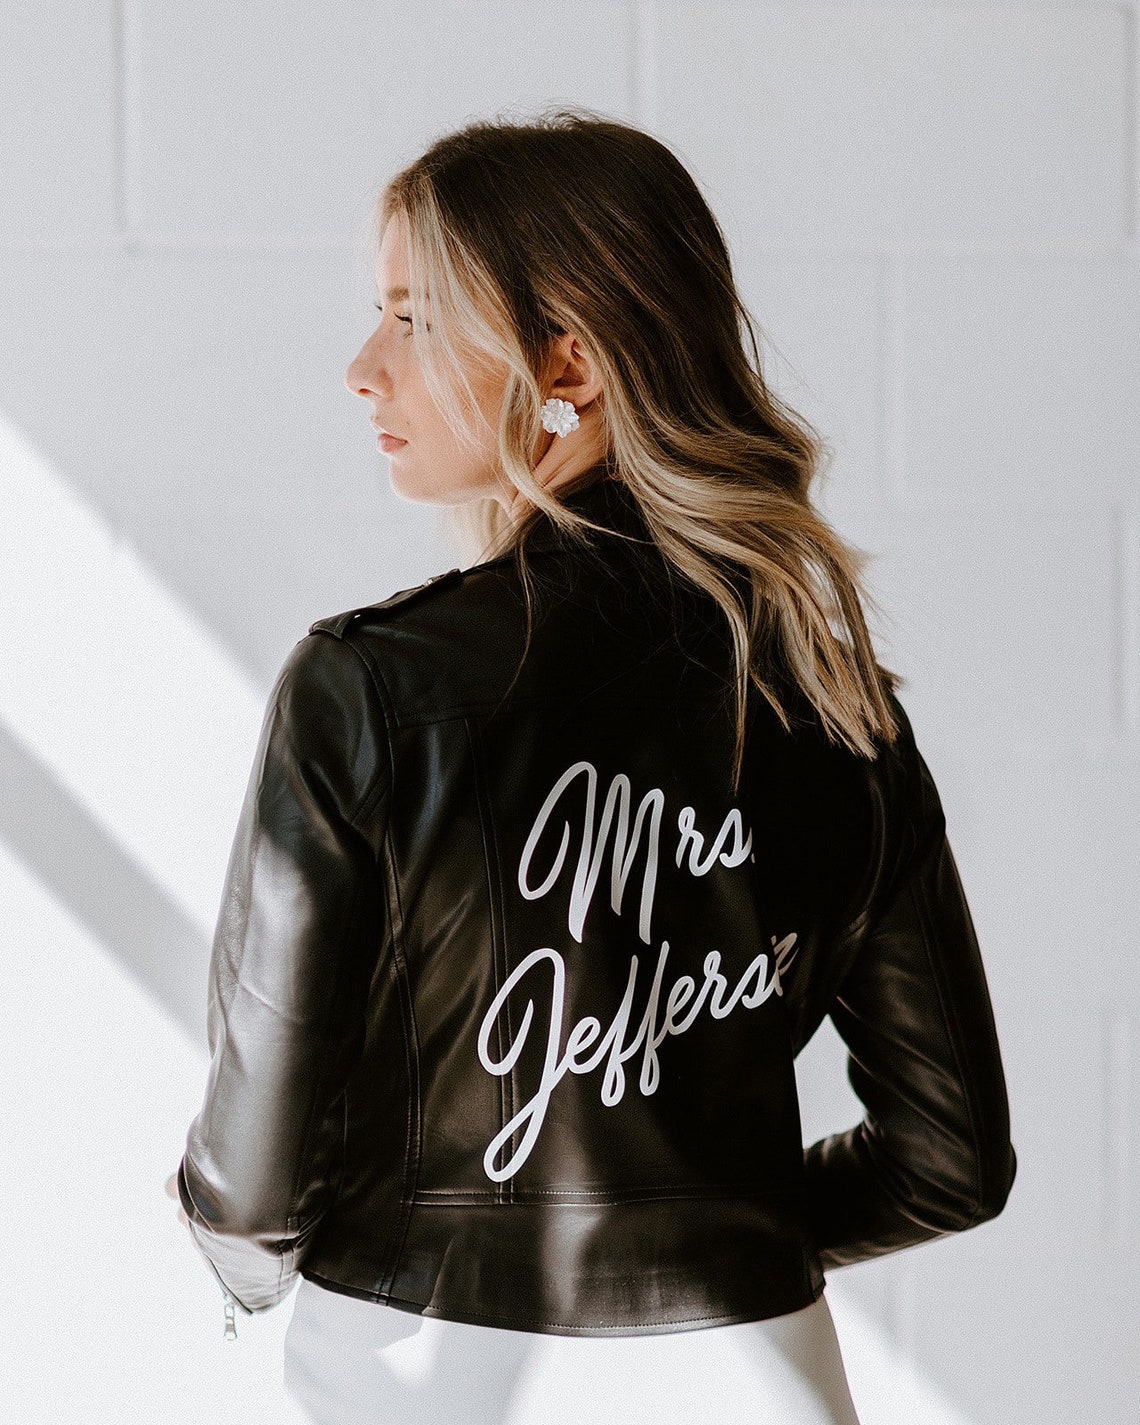 This image shows a woman wearing a customised leather jacket. 